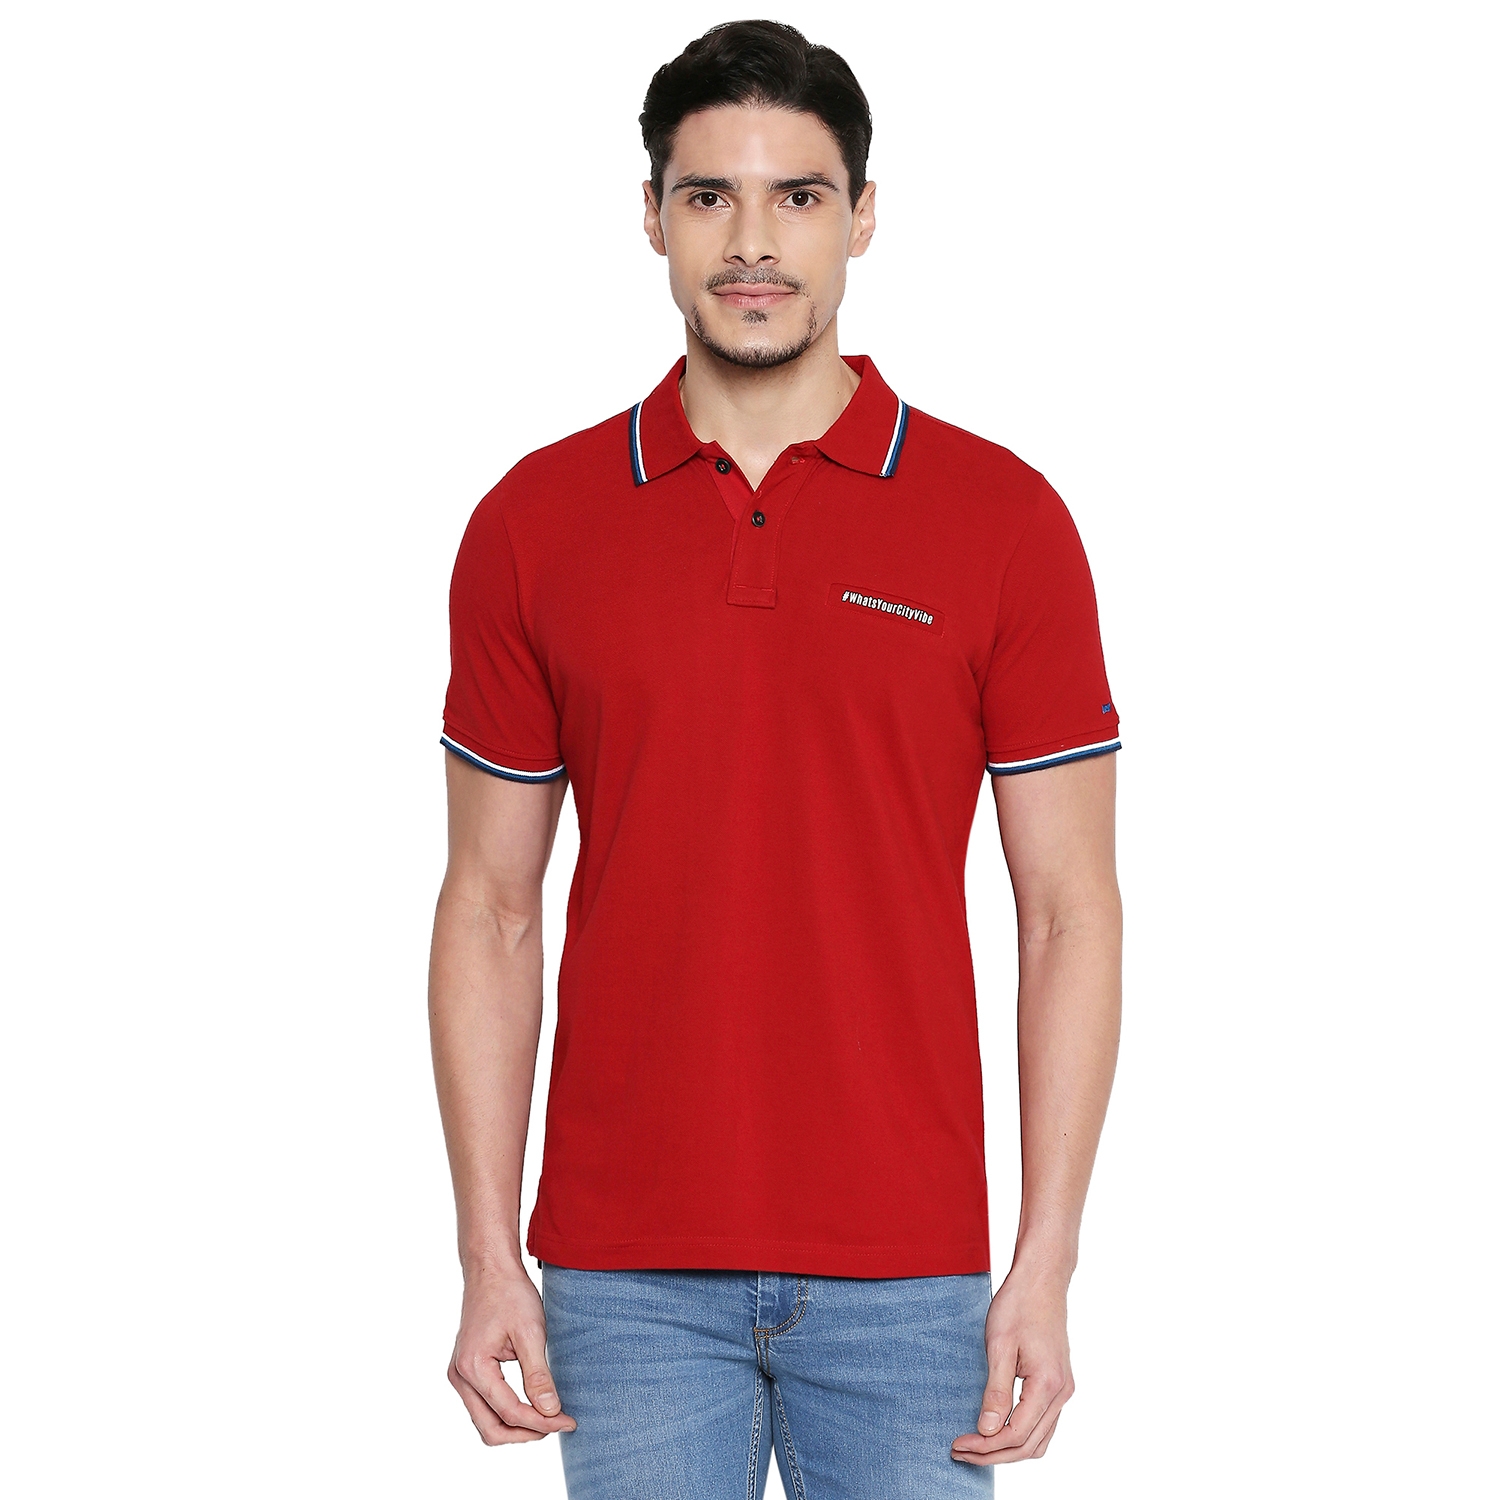 Basics | Basics Muscle Fit Scooter Red Polo T Shirt